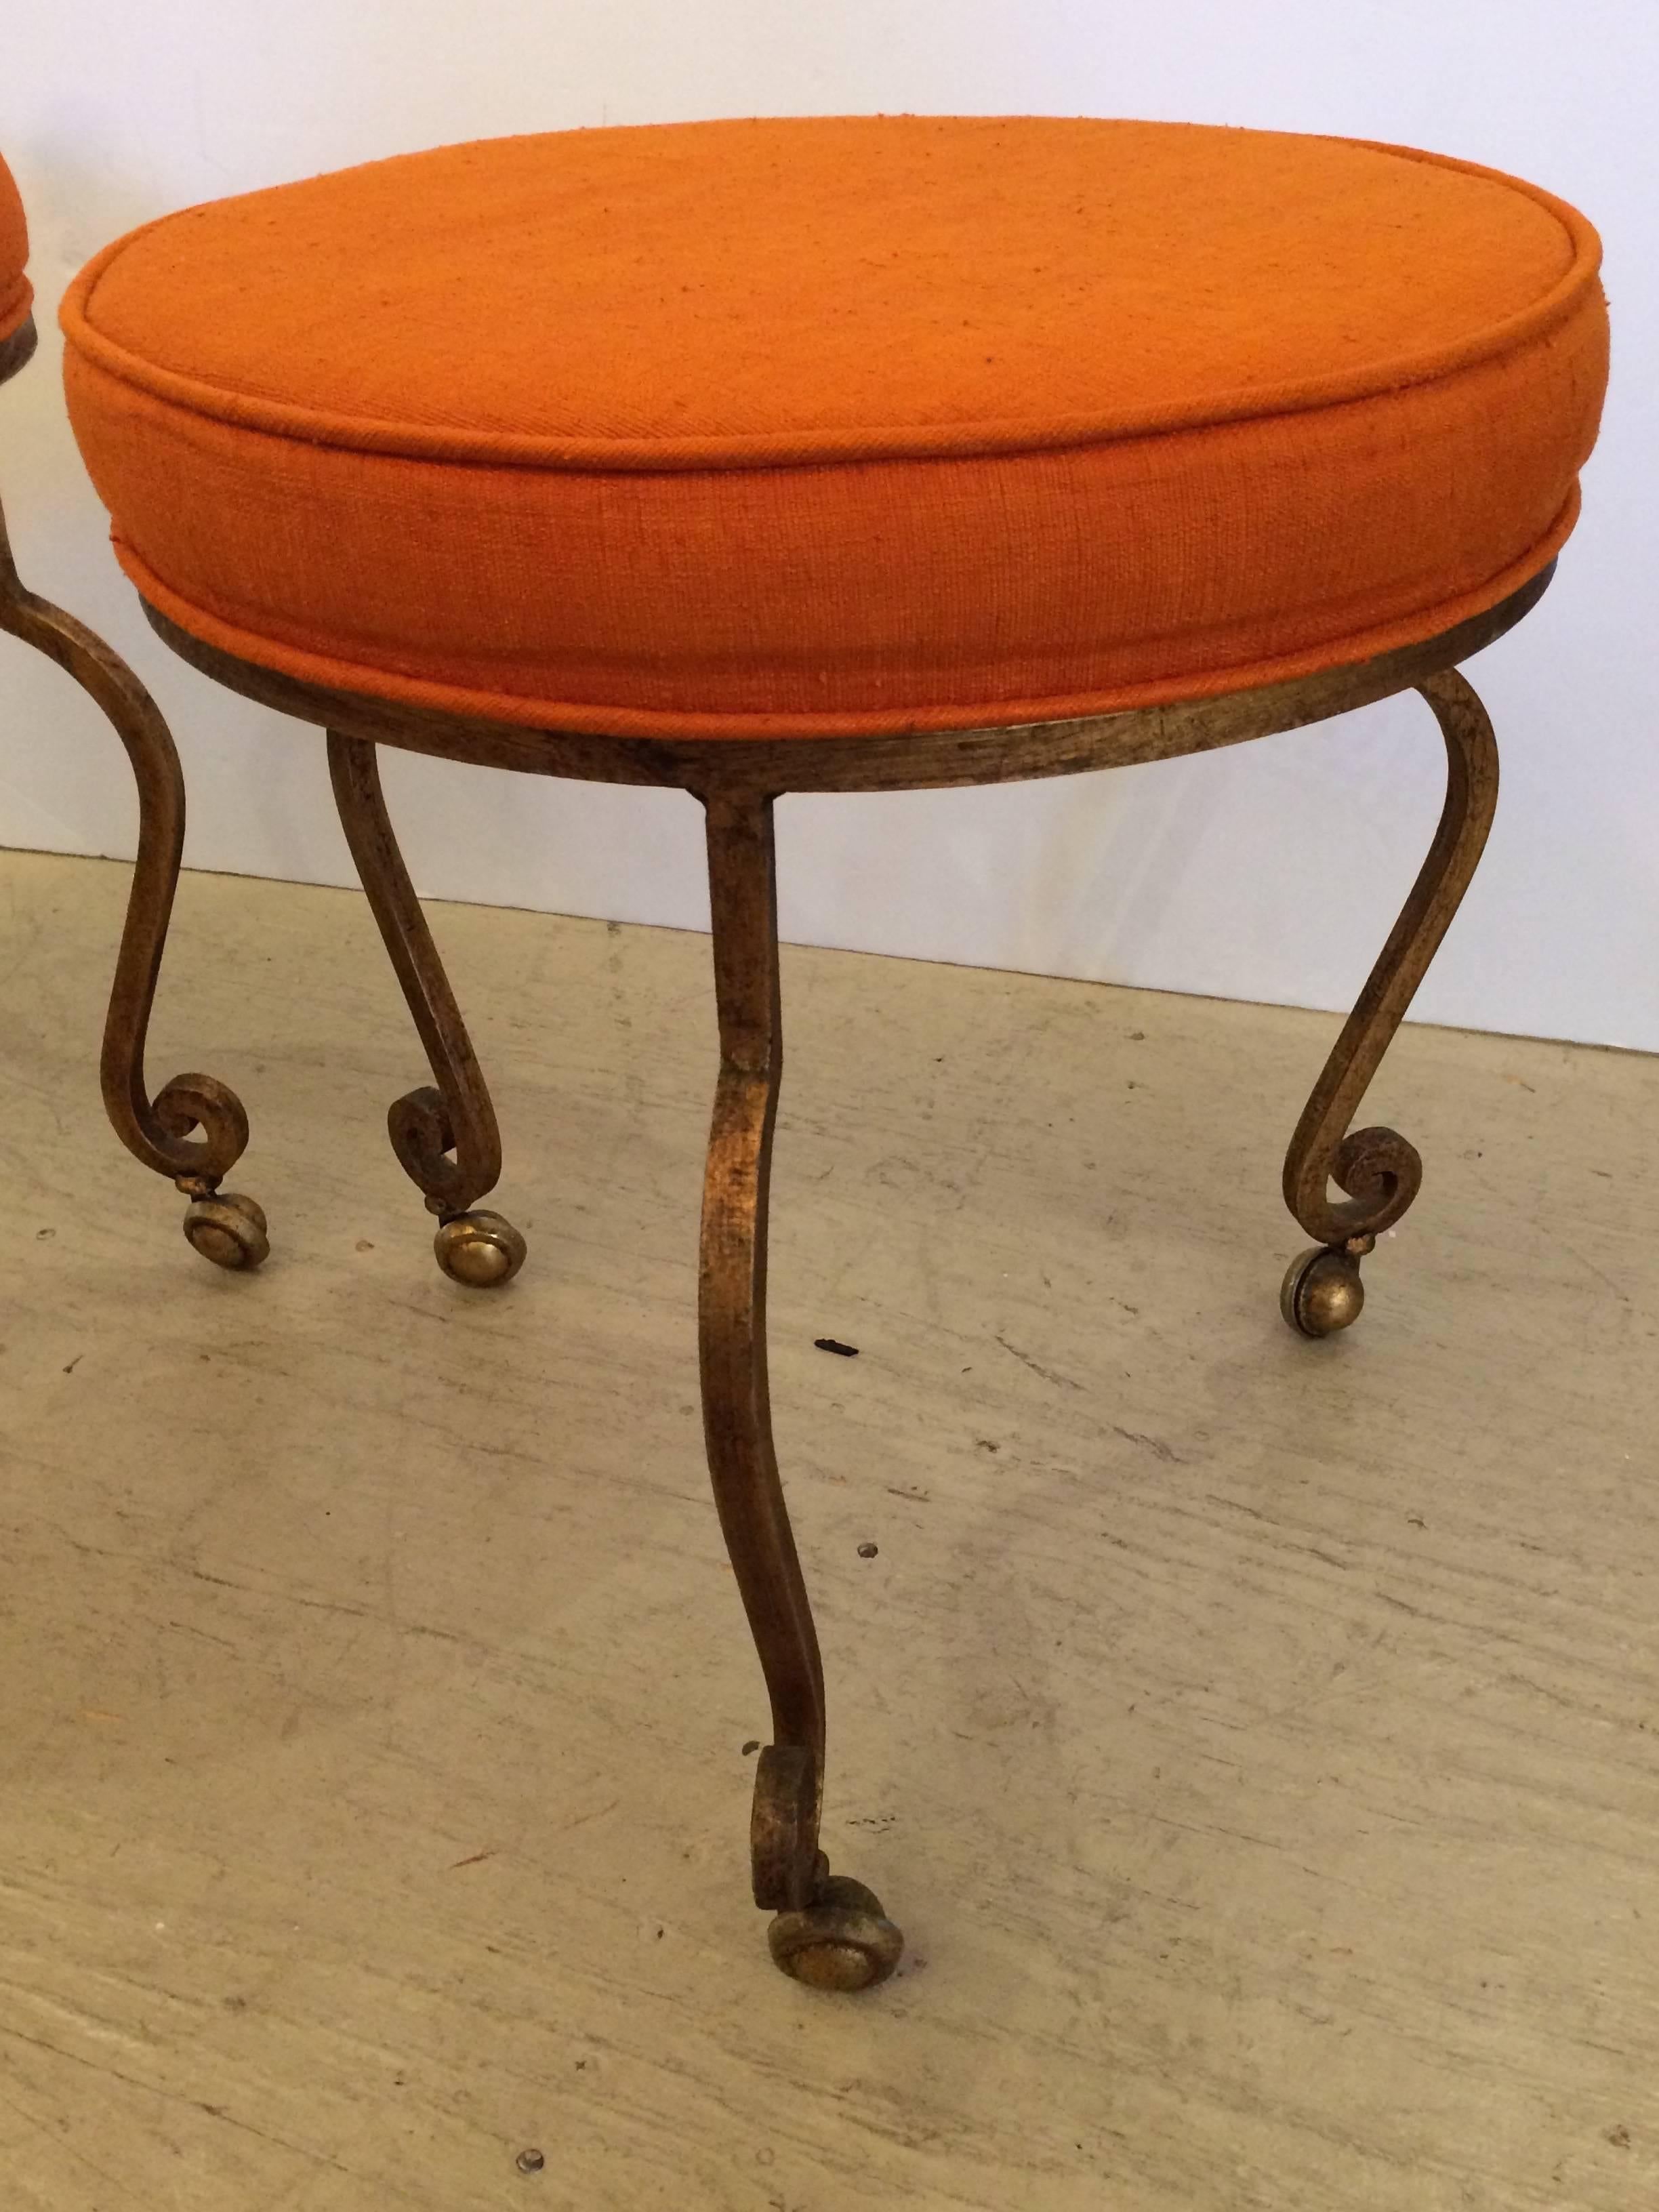 Hollywood Regency Sizzling Pair of Mid-Century Modern Gilt Iron and Tangerine Silk Stools Ottomans